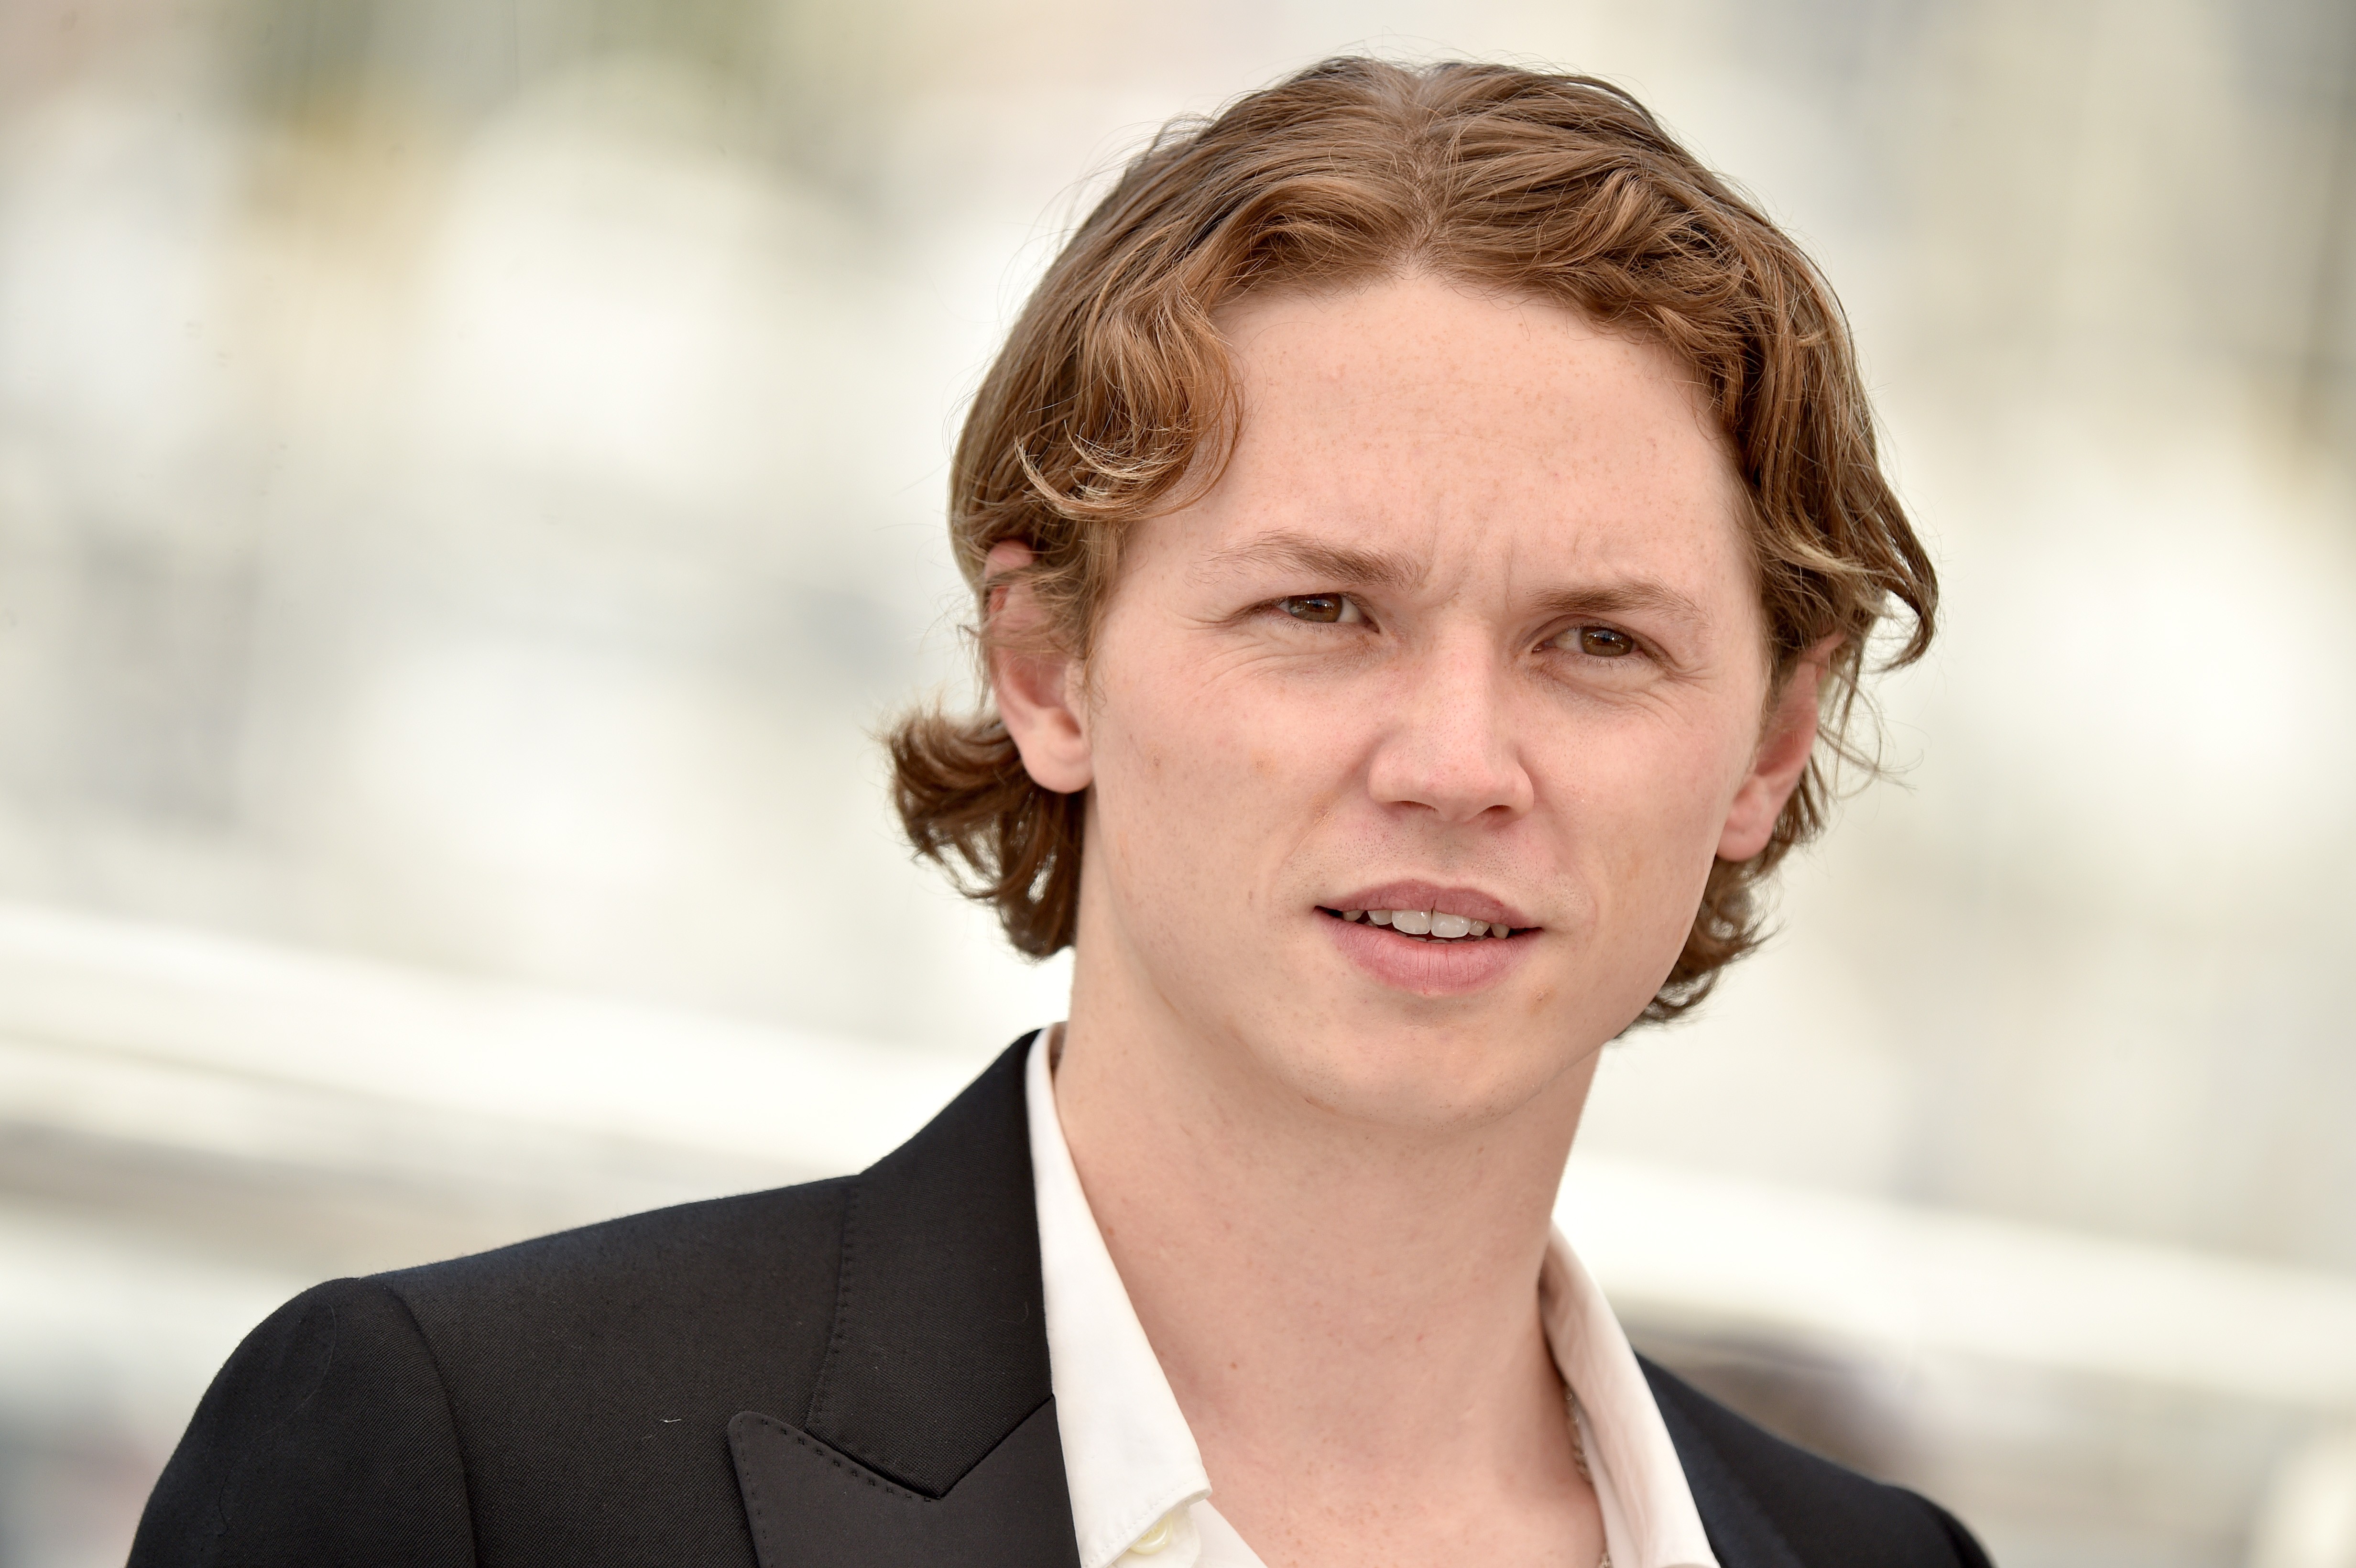 CANNES, FRANCE - JULY 07: Jack Kilmer attends "Val" photocall during the 74th annual Cannes Film Festival on July 07, 2021 in Cannes, France. (Photo by Lionel Hahn/Getty Images) (Foto: Getty Images)